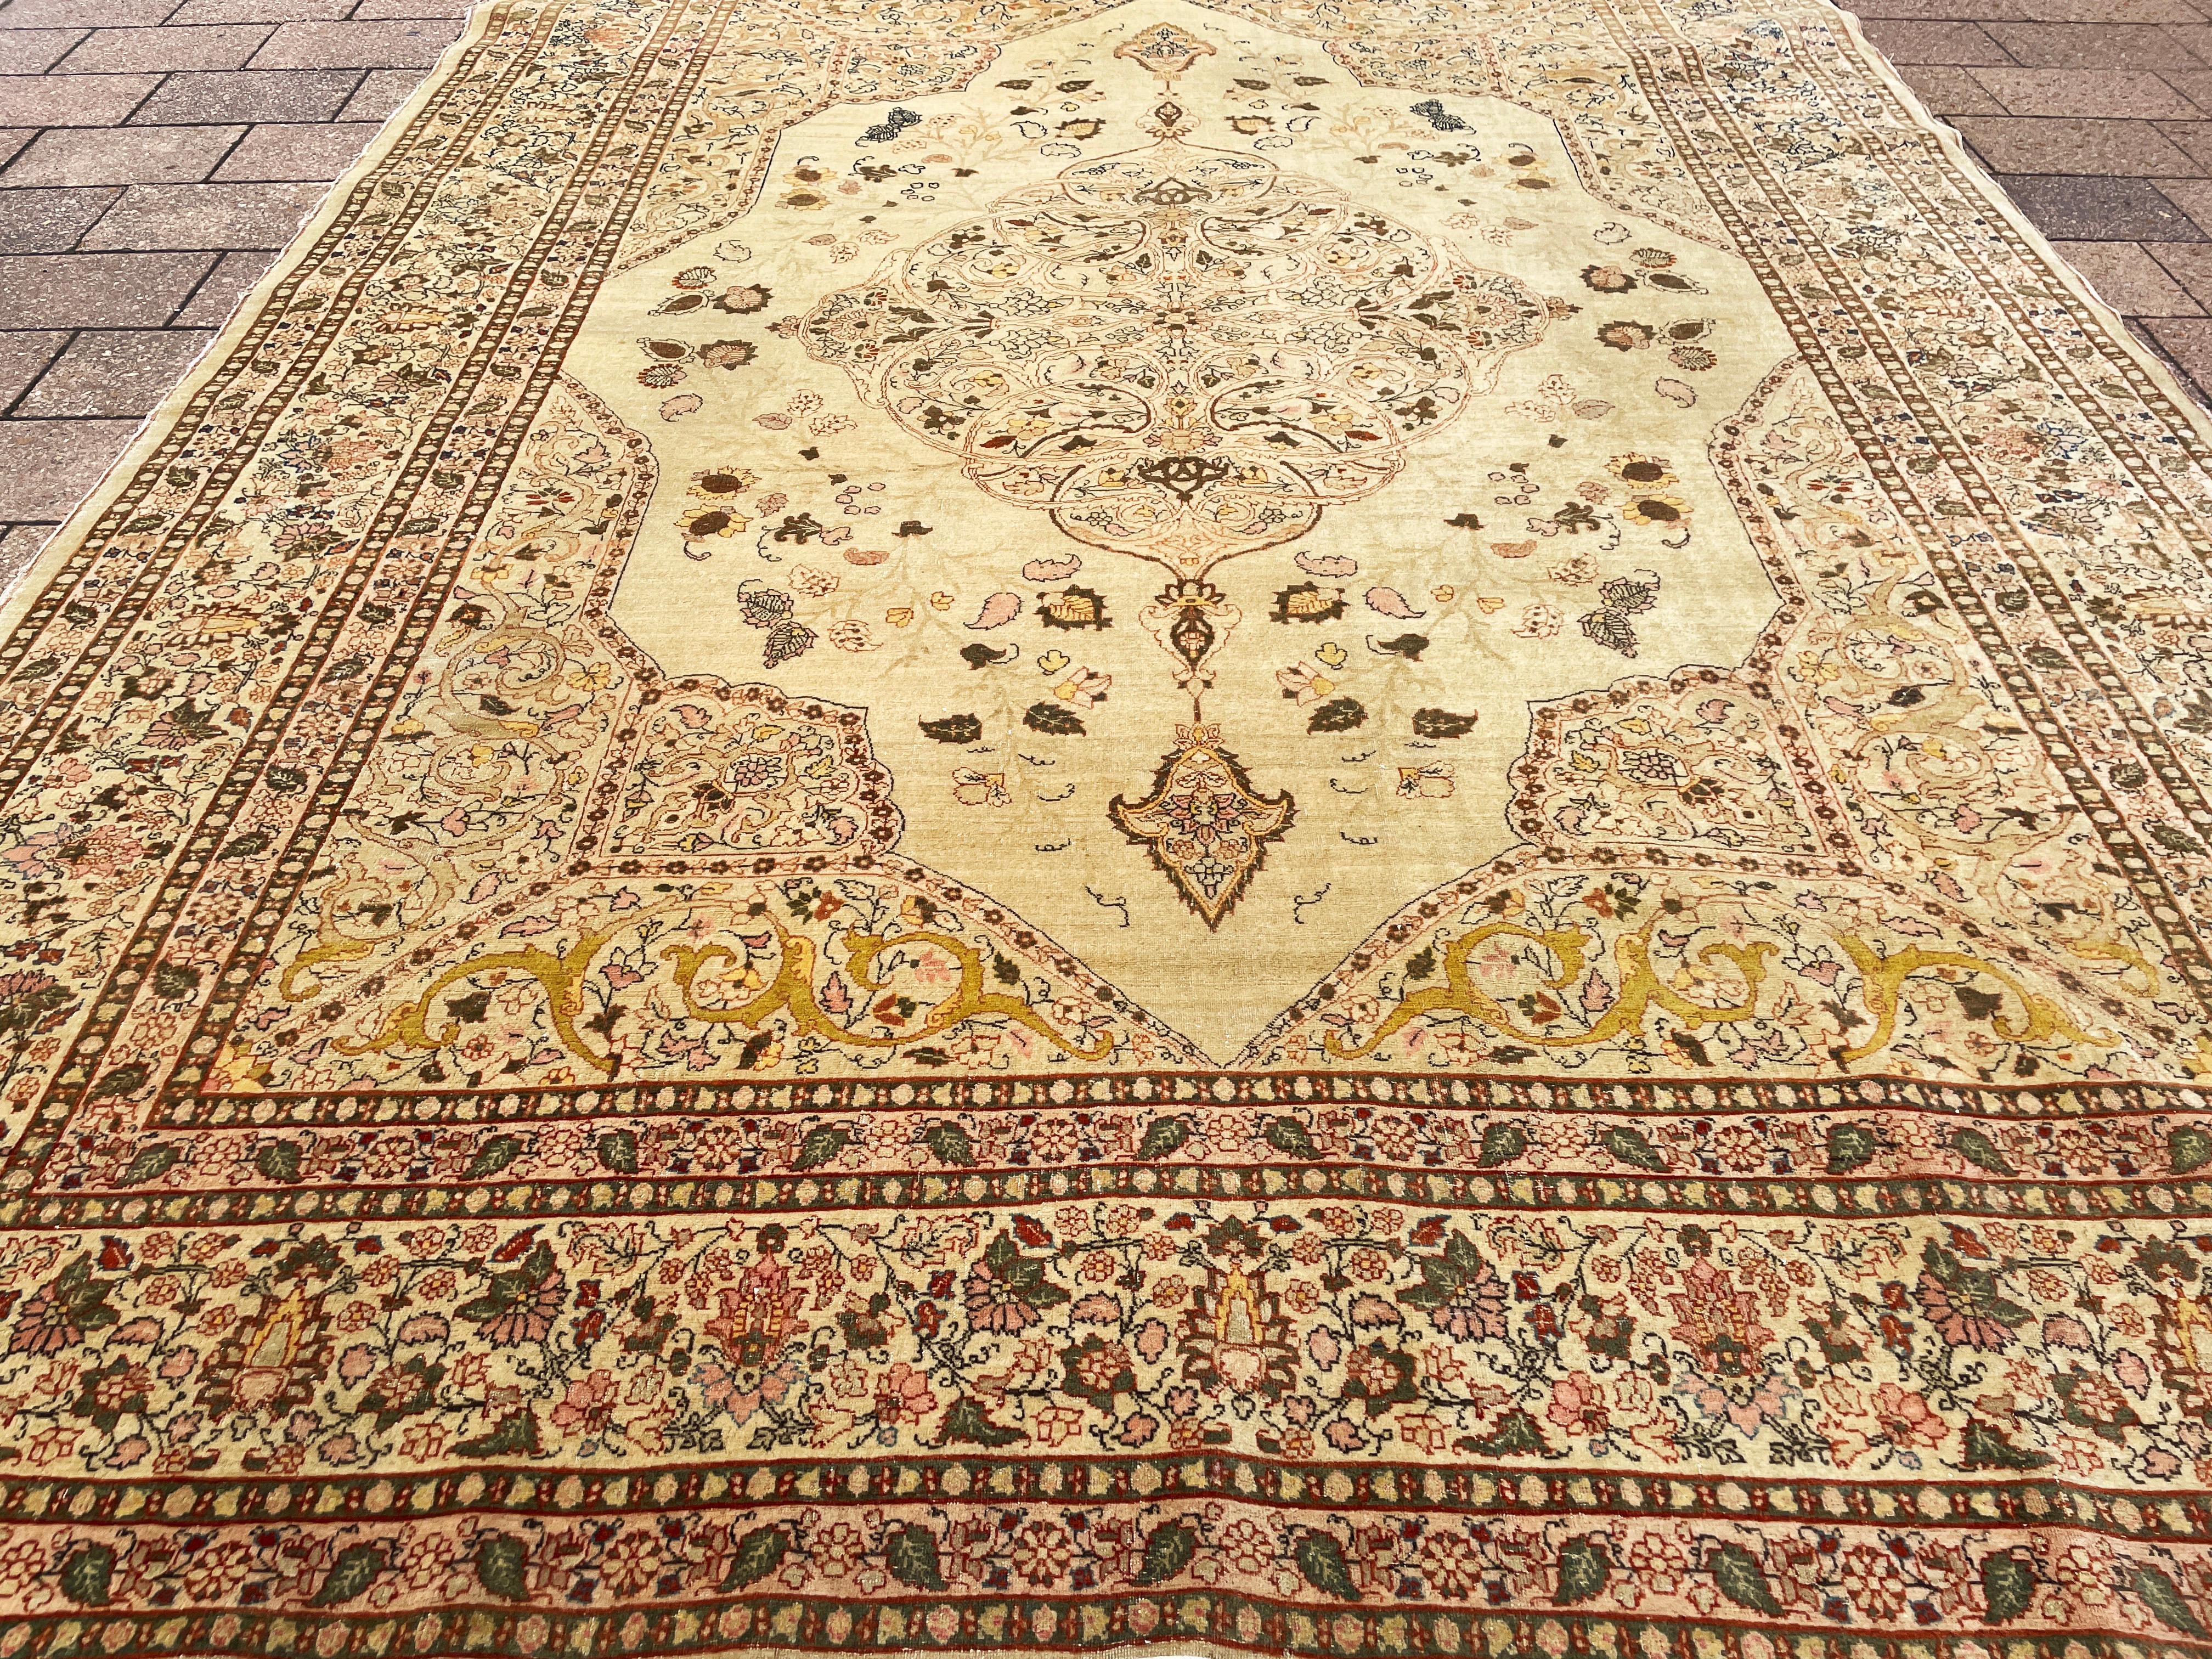 19th Century Antique Persian Tabriz Hajji Jalili Carpet, The Best Of Persian Rugs For Sale